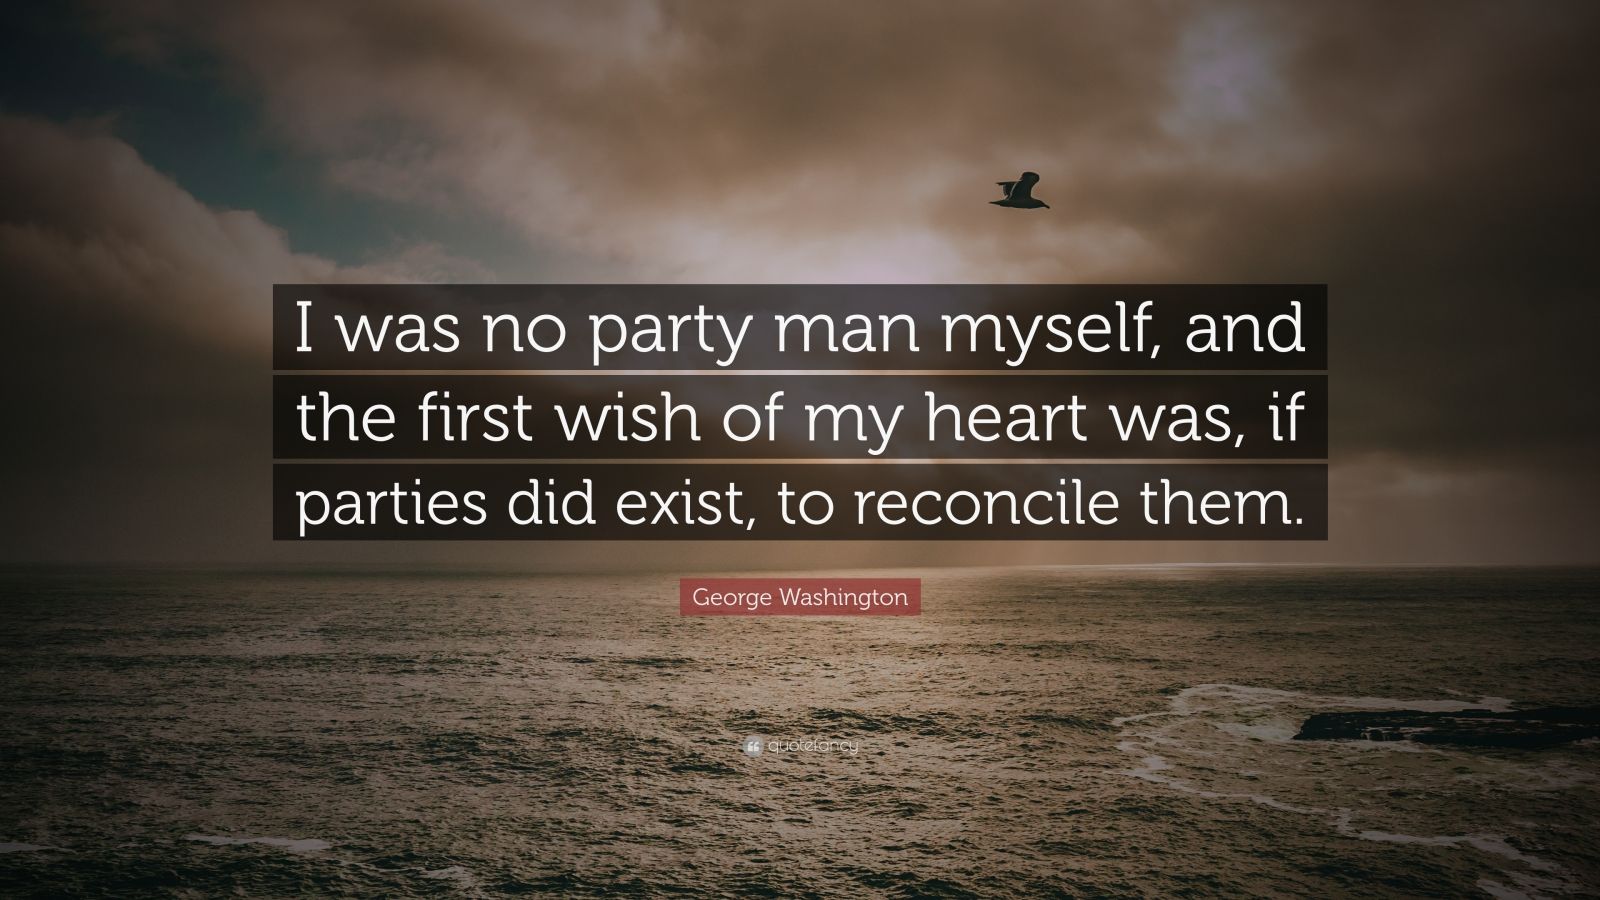 George Washington Quote: “I was no party man myself, and the first wish